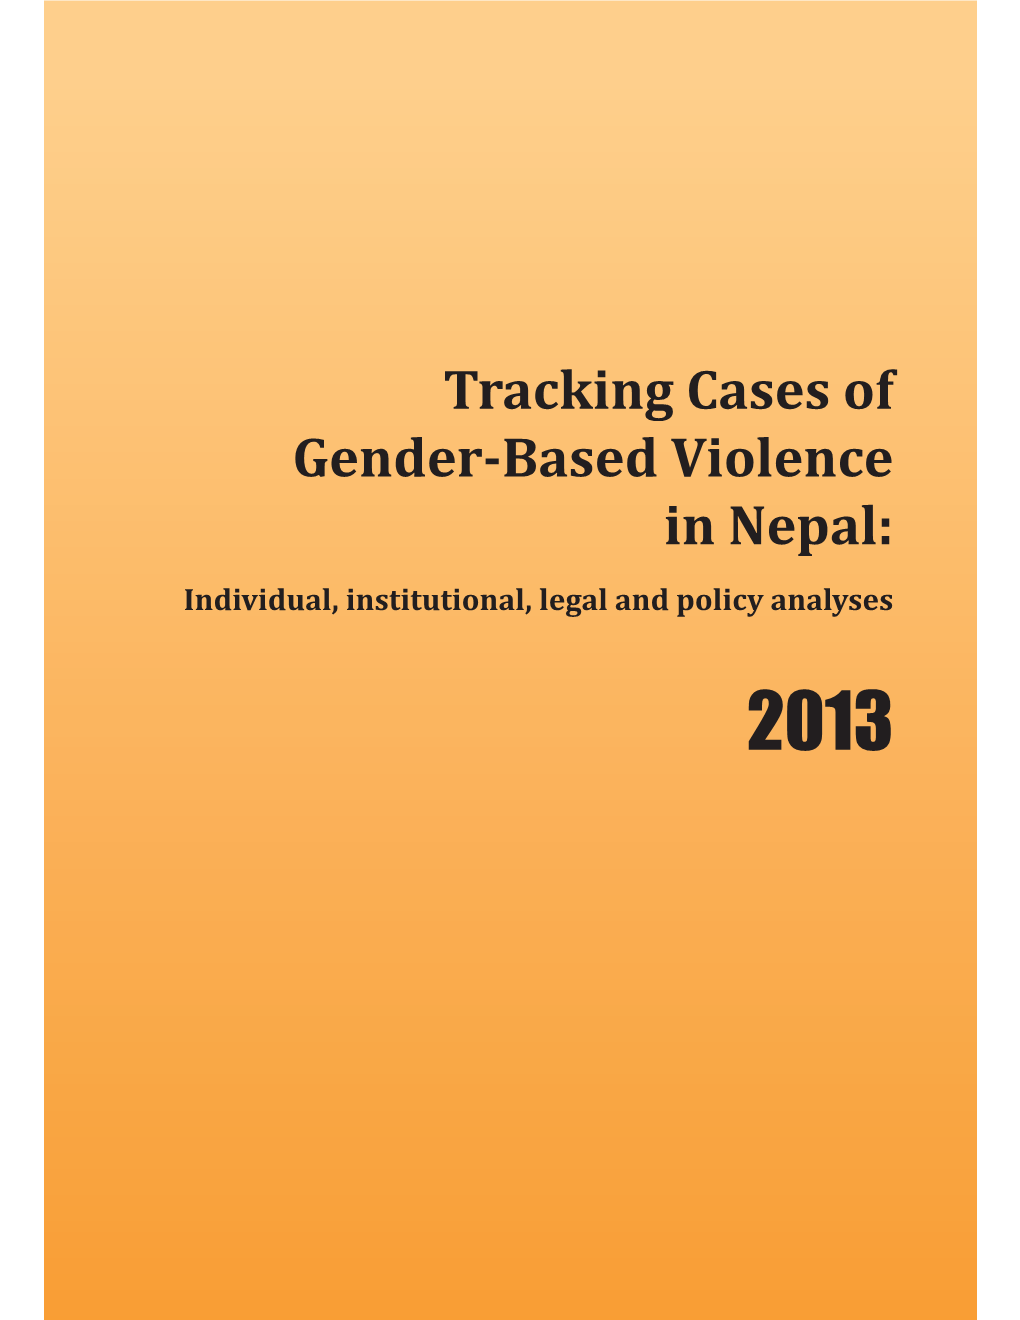 Tracking Cases of Gender-Based Violence in Nepal